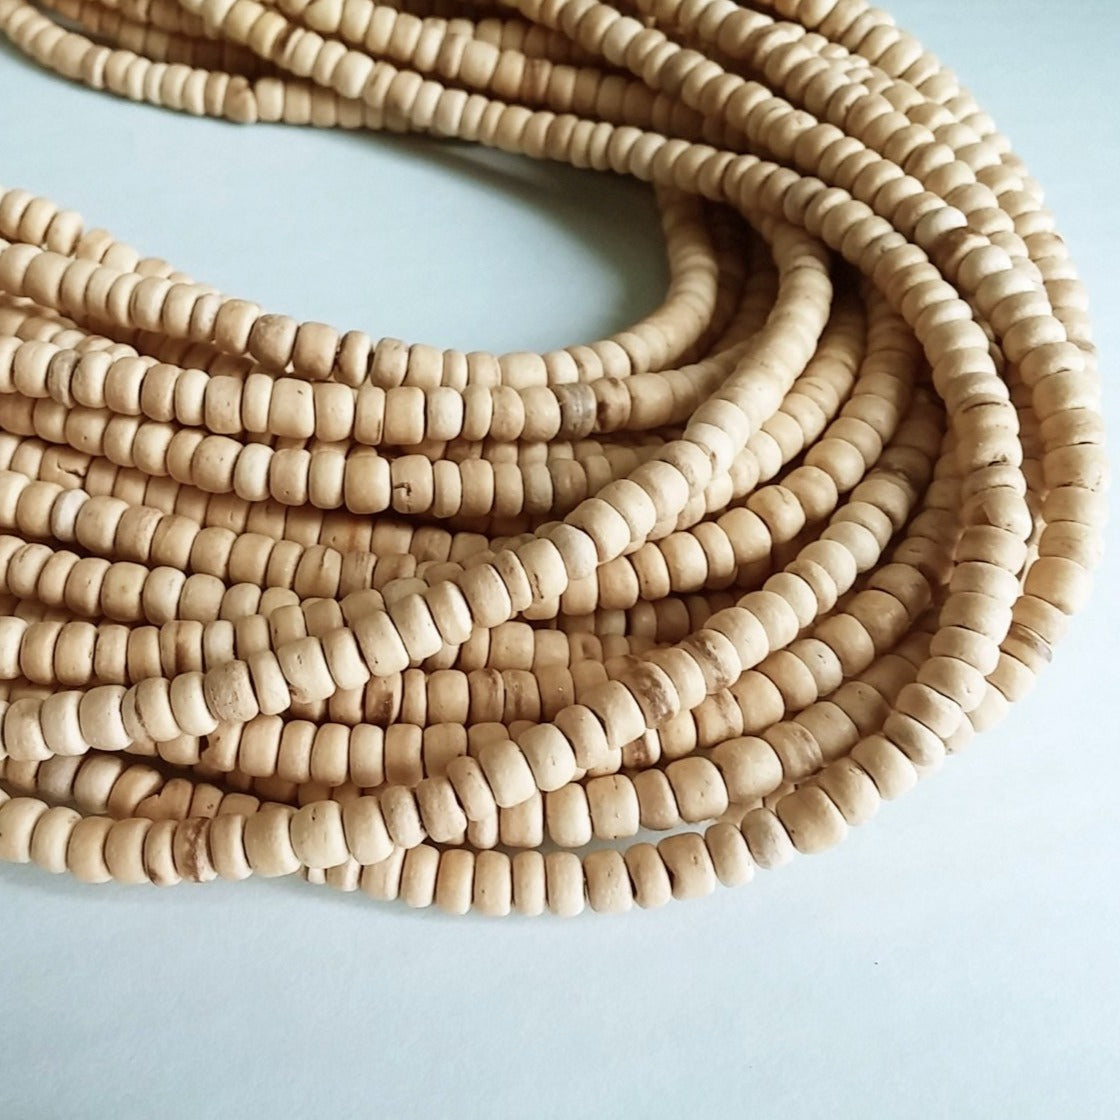 120 natural coconut beads - Coconut Rondelle Disk Beads 4-5mm